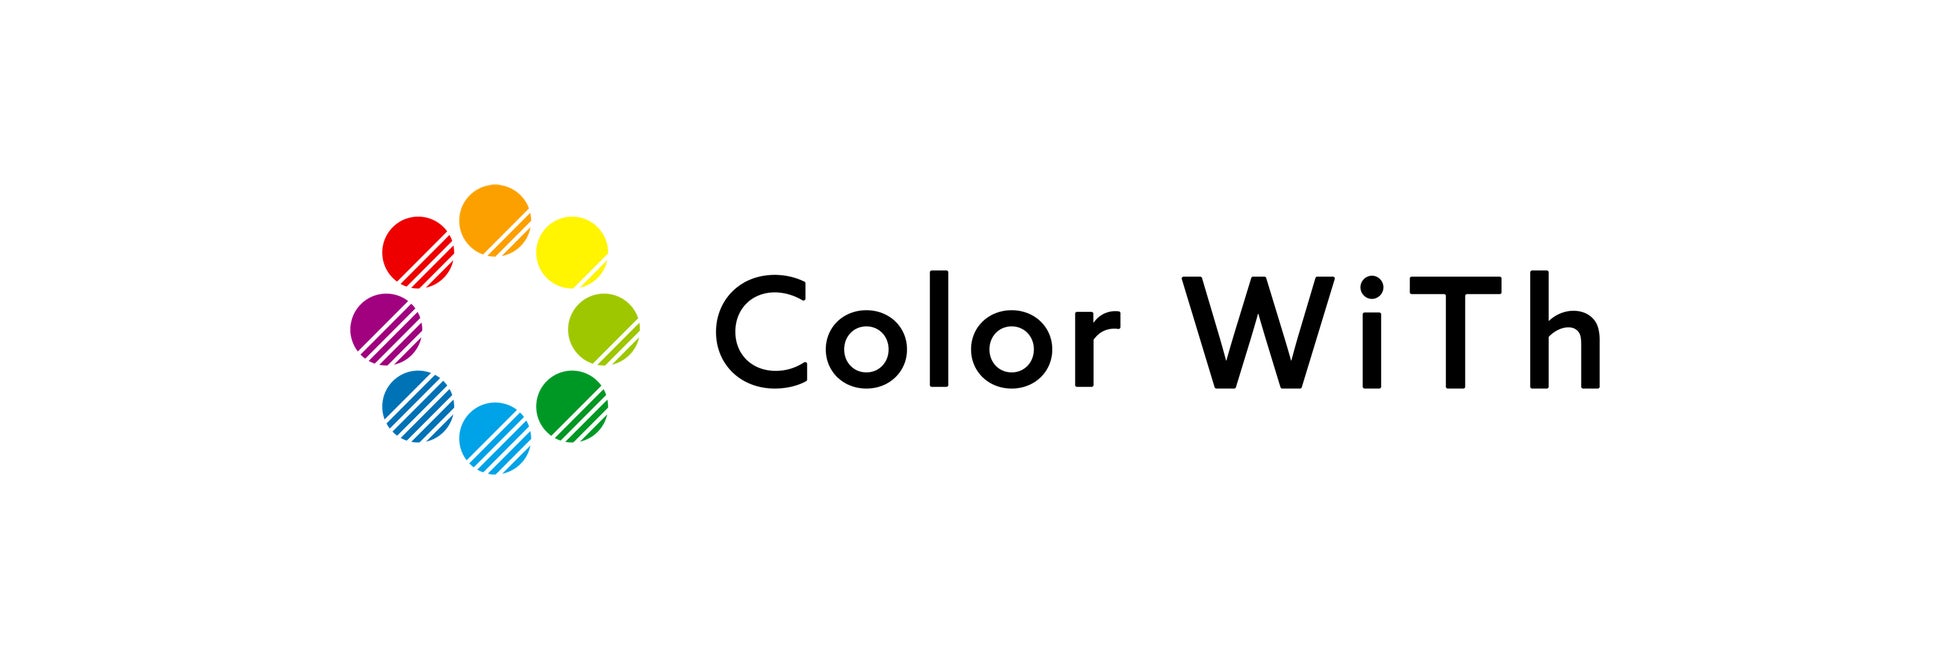 Color WiTh株式会社（カラウィズ）